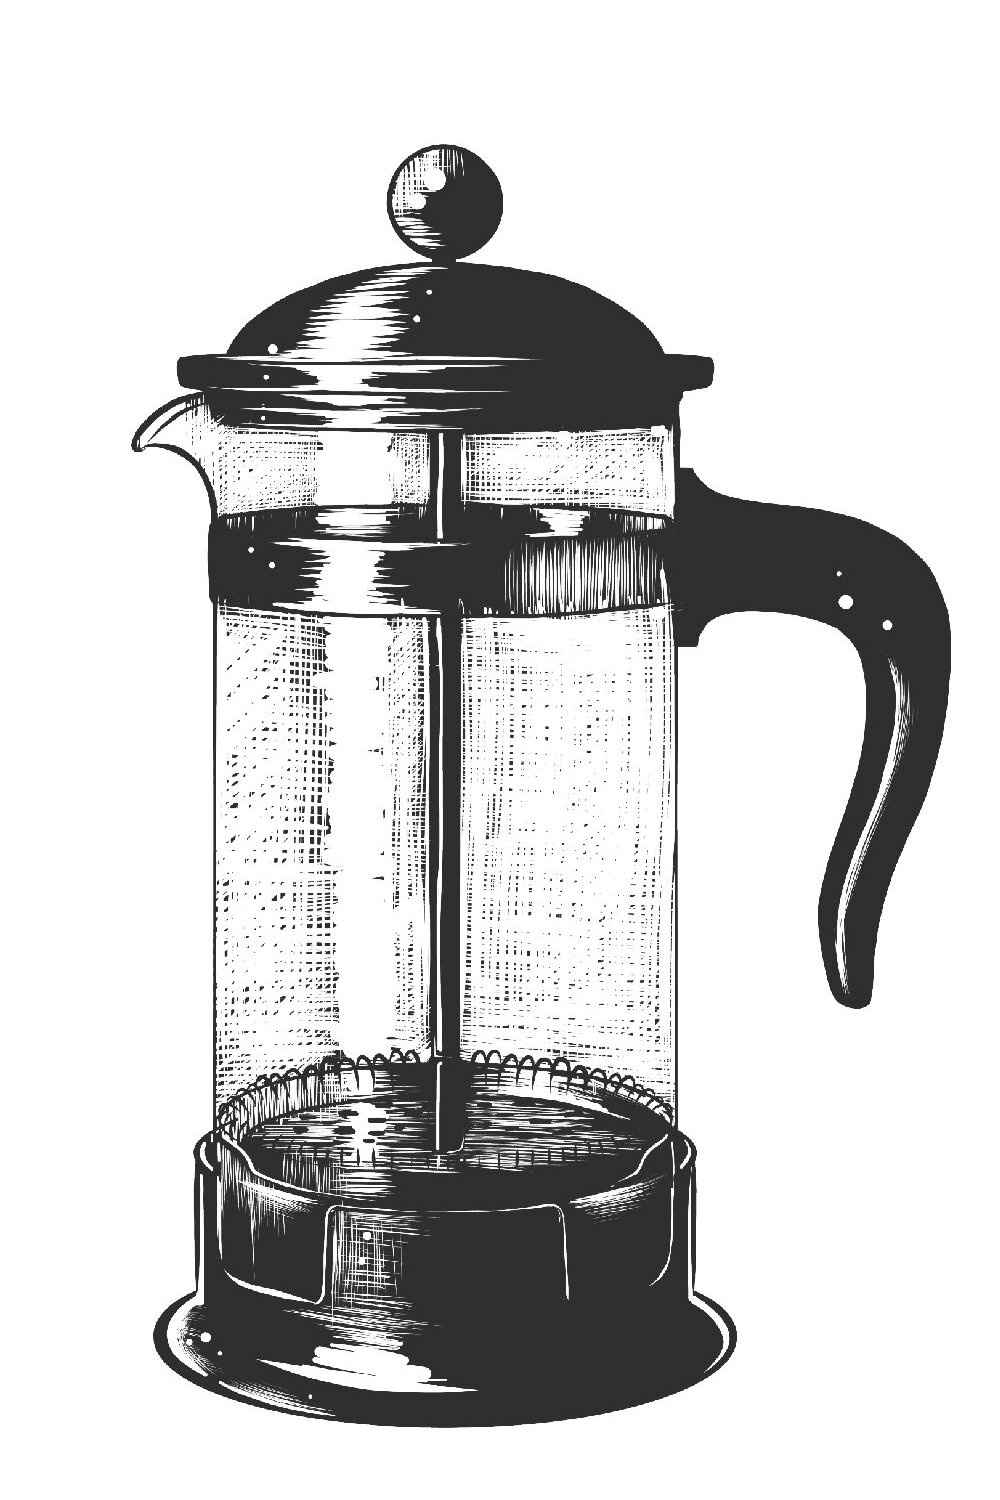 A black and white drawing of a french press coffee maker.